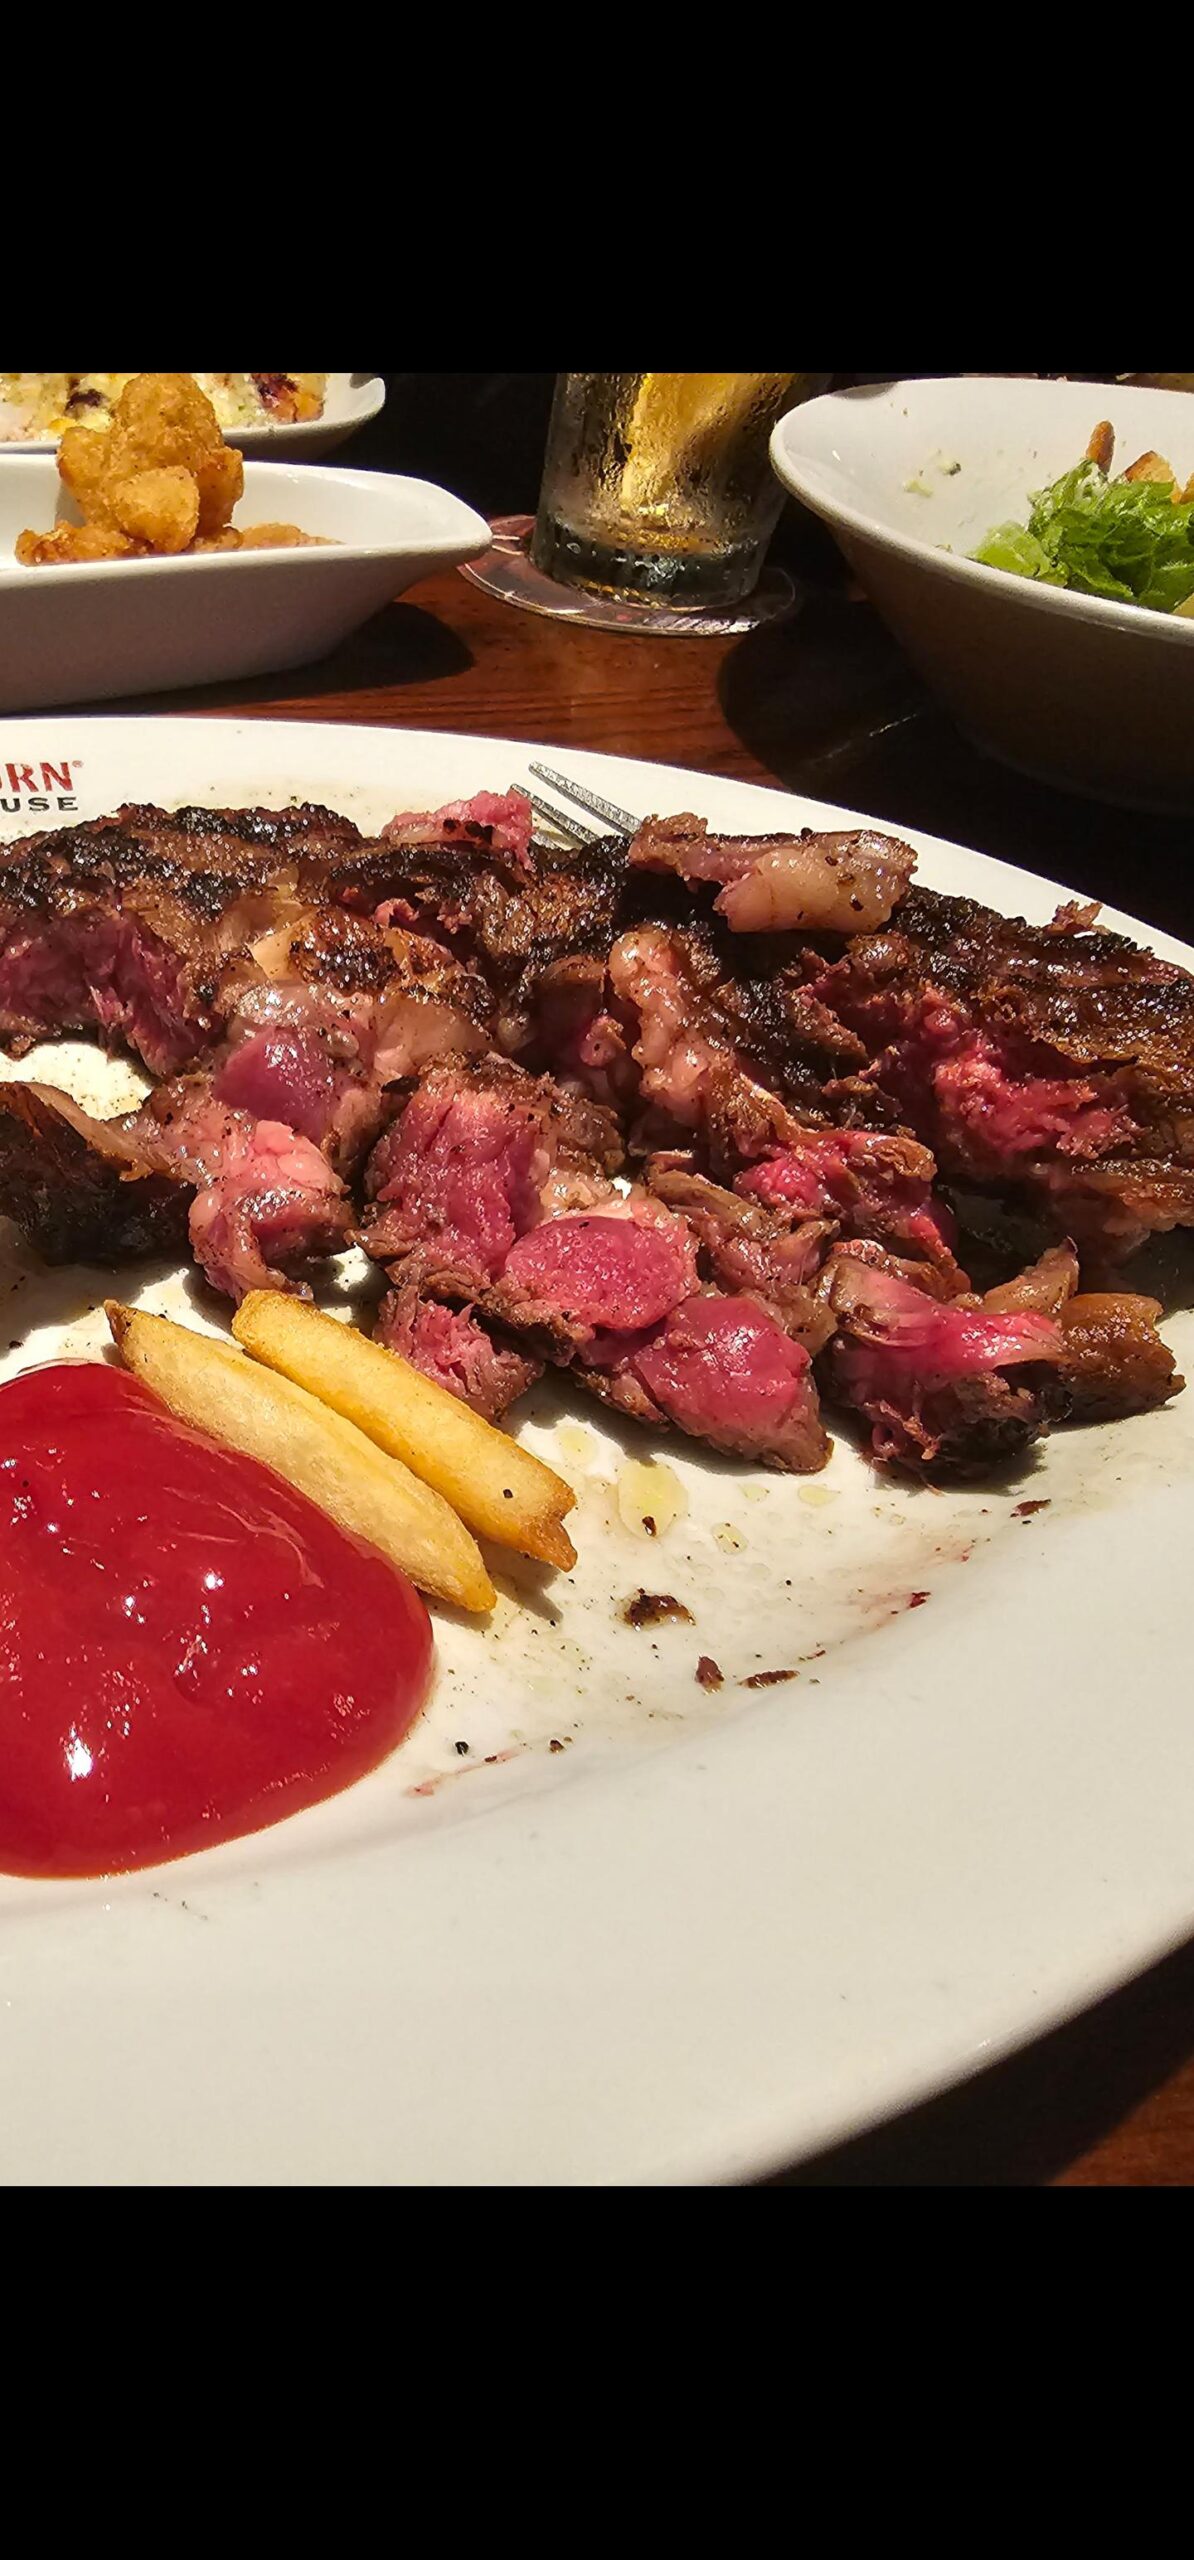 Longhorn Steakhouse: Outlaw Ribeye ... Rare or Raw? - Dining and Cooking